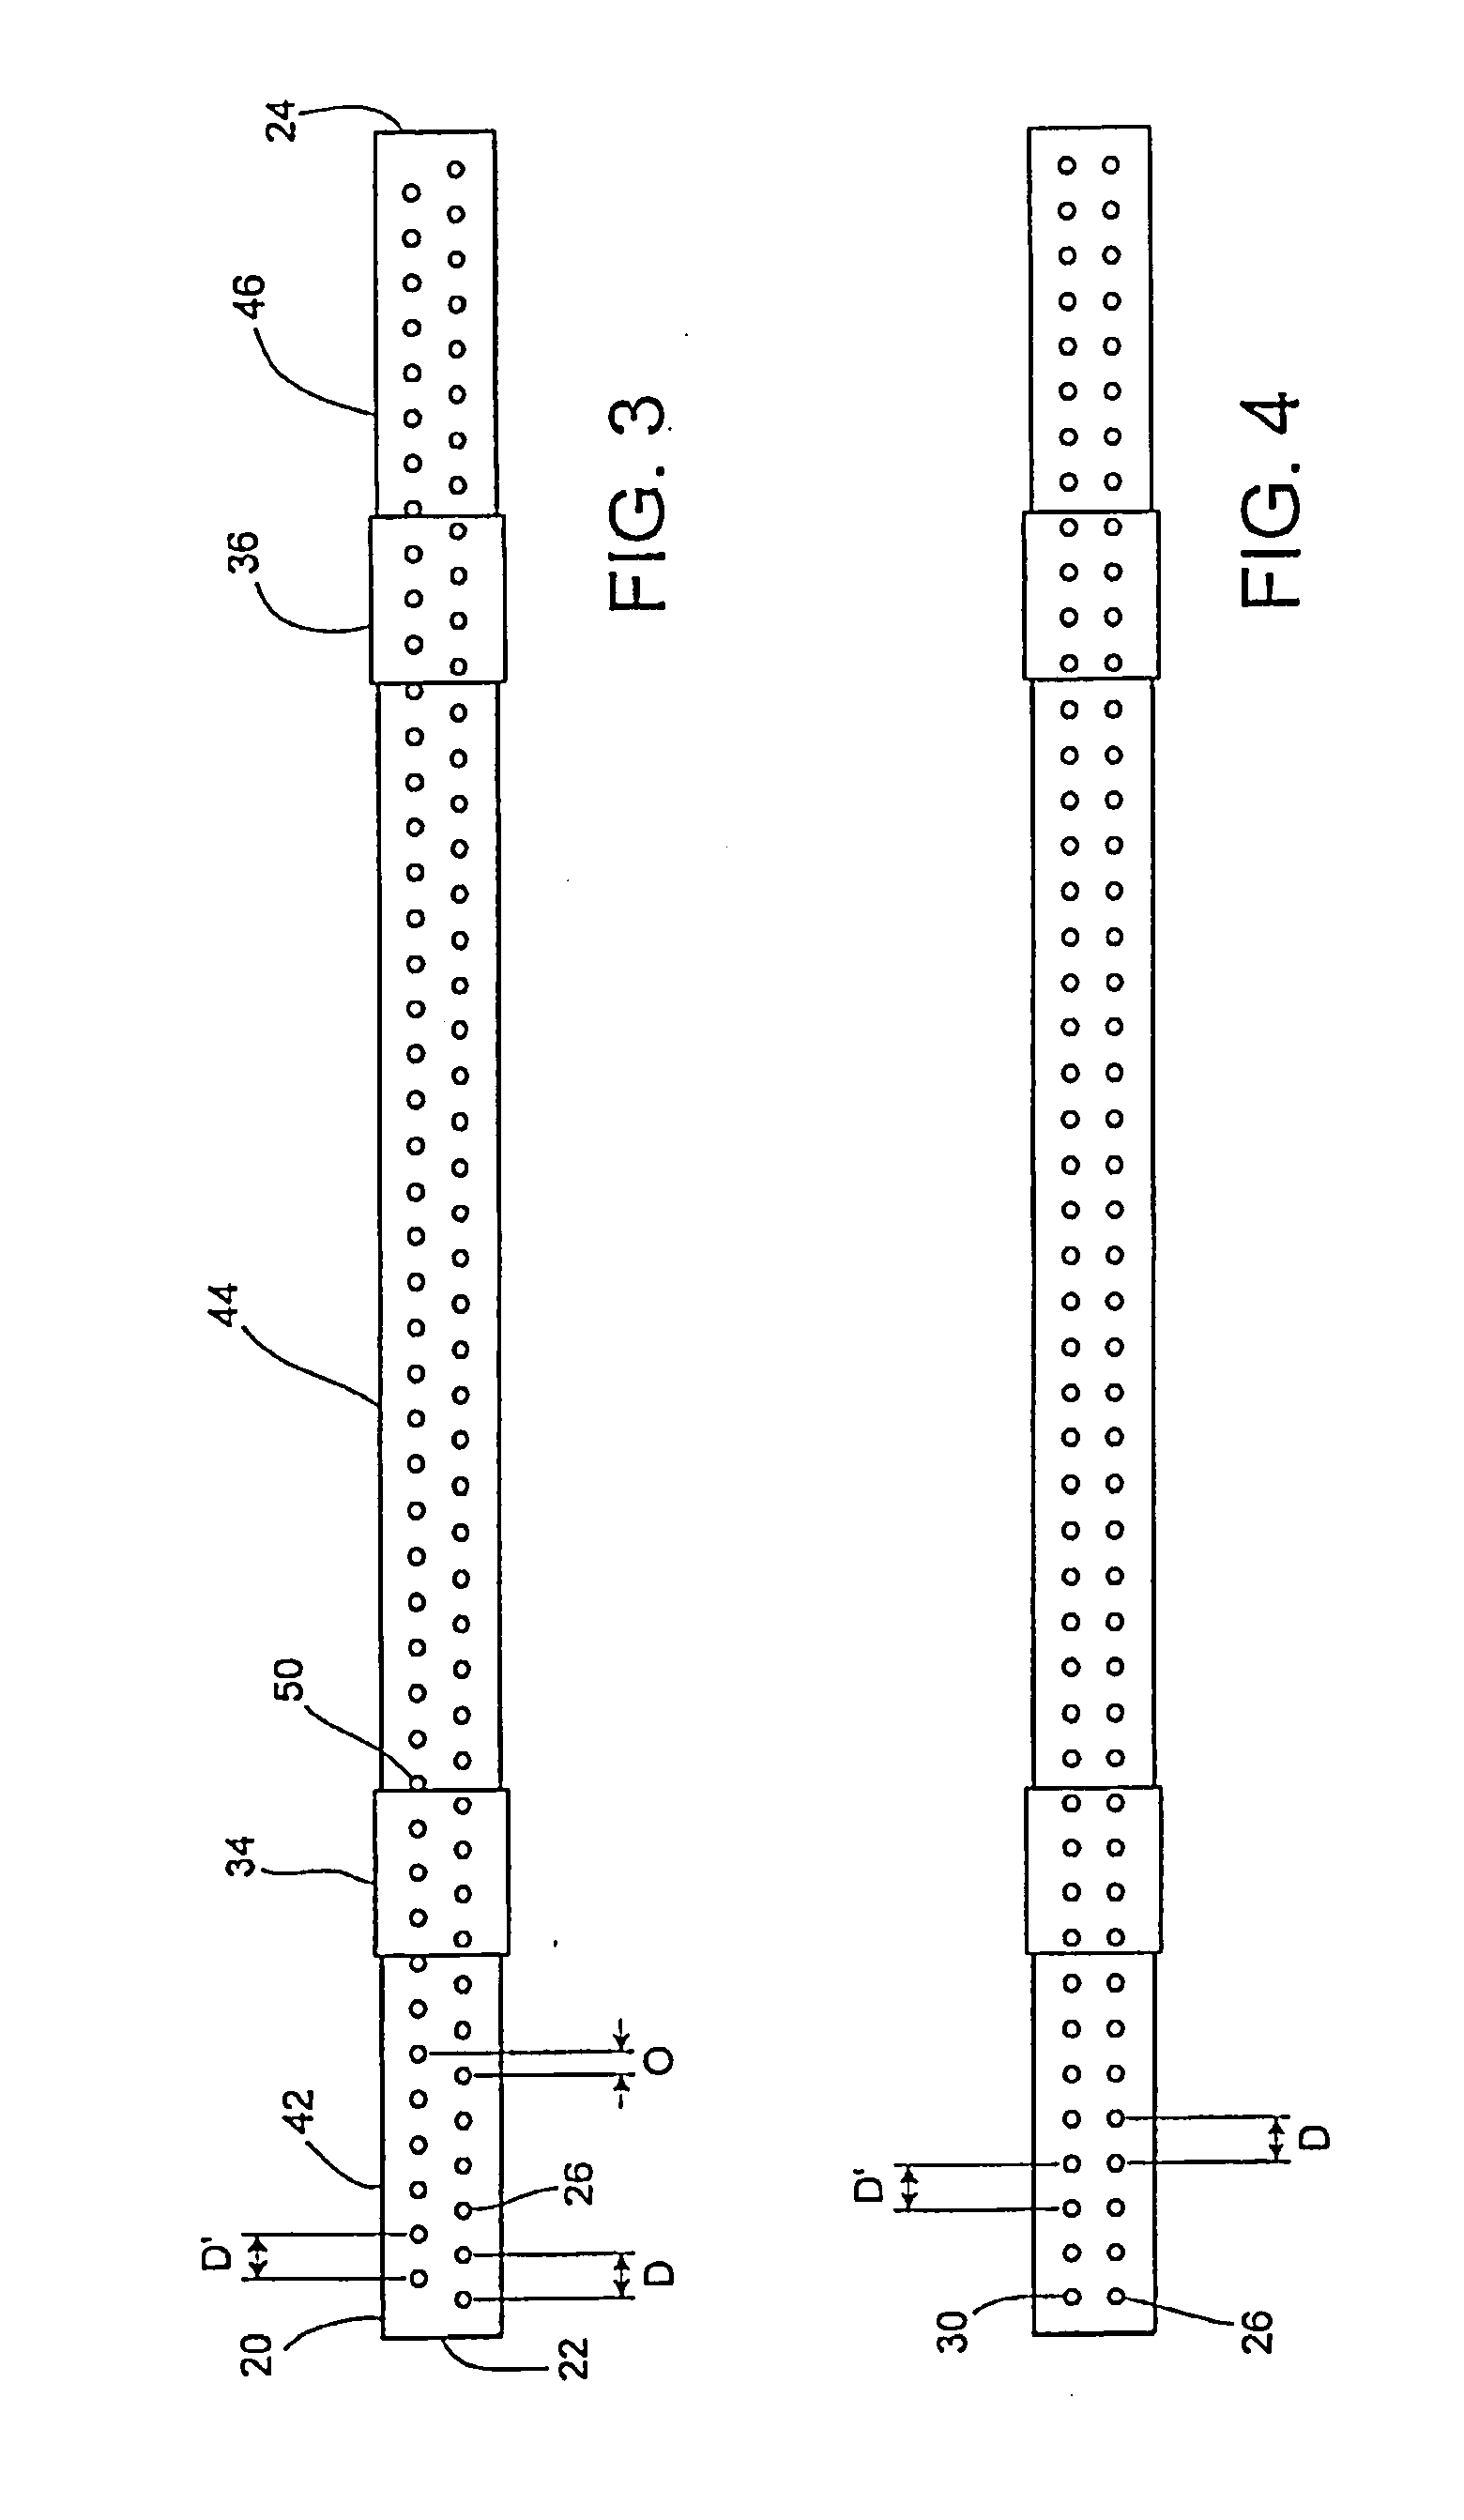 Nozzle system and method for manufacturing composite sandwich panels